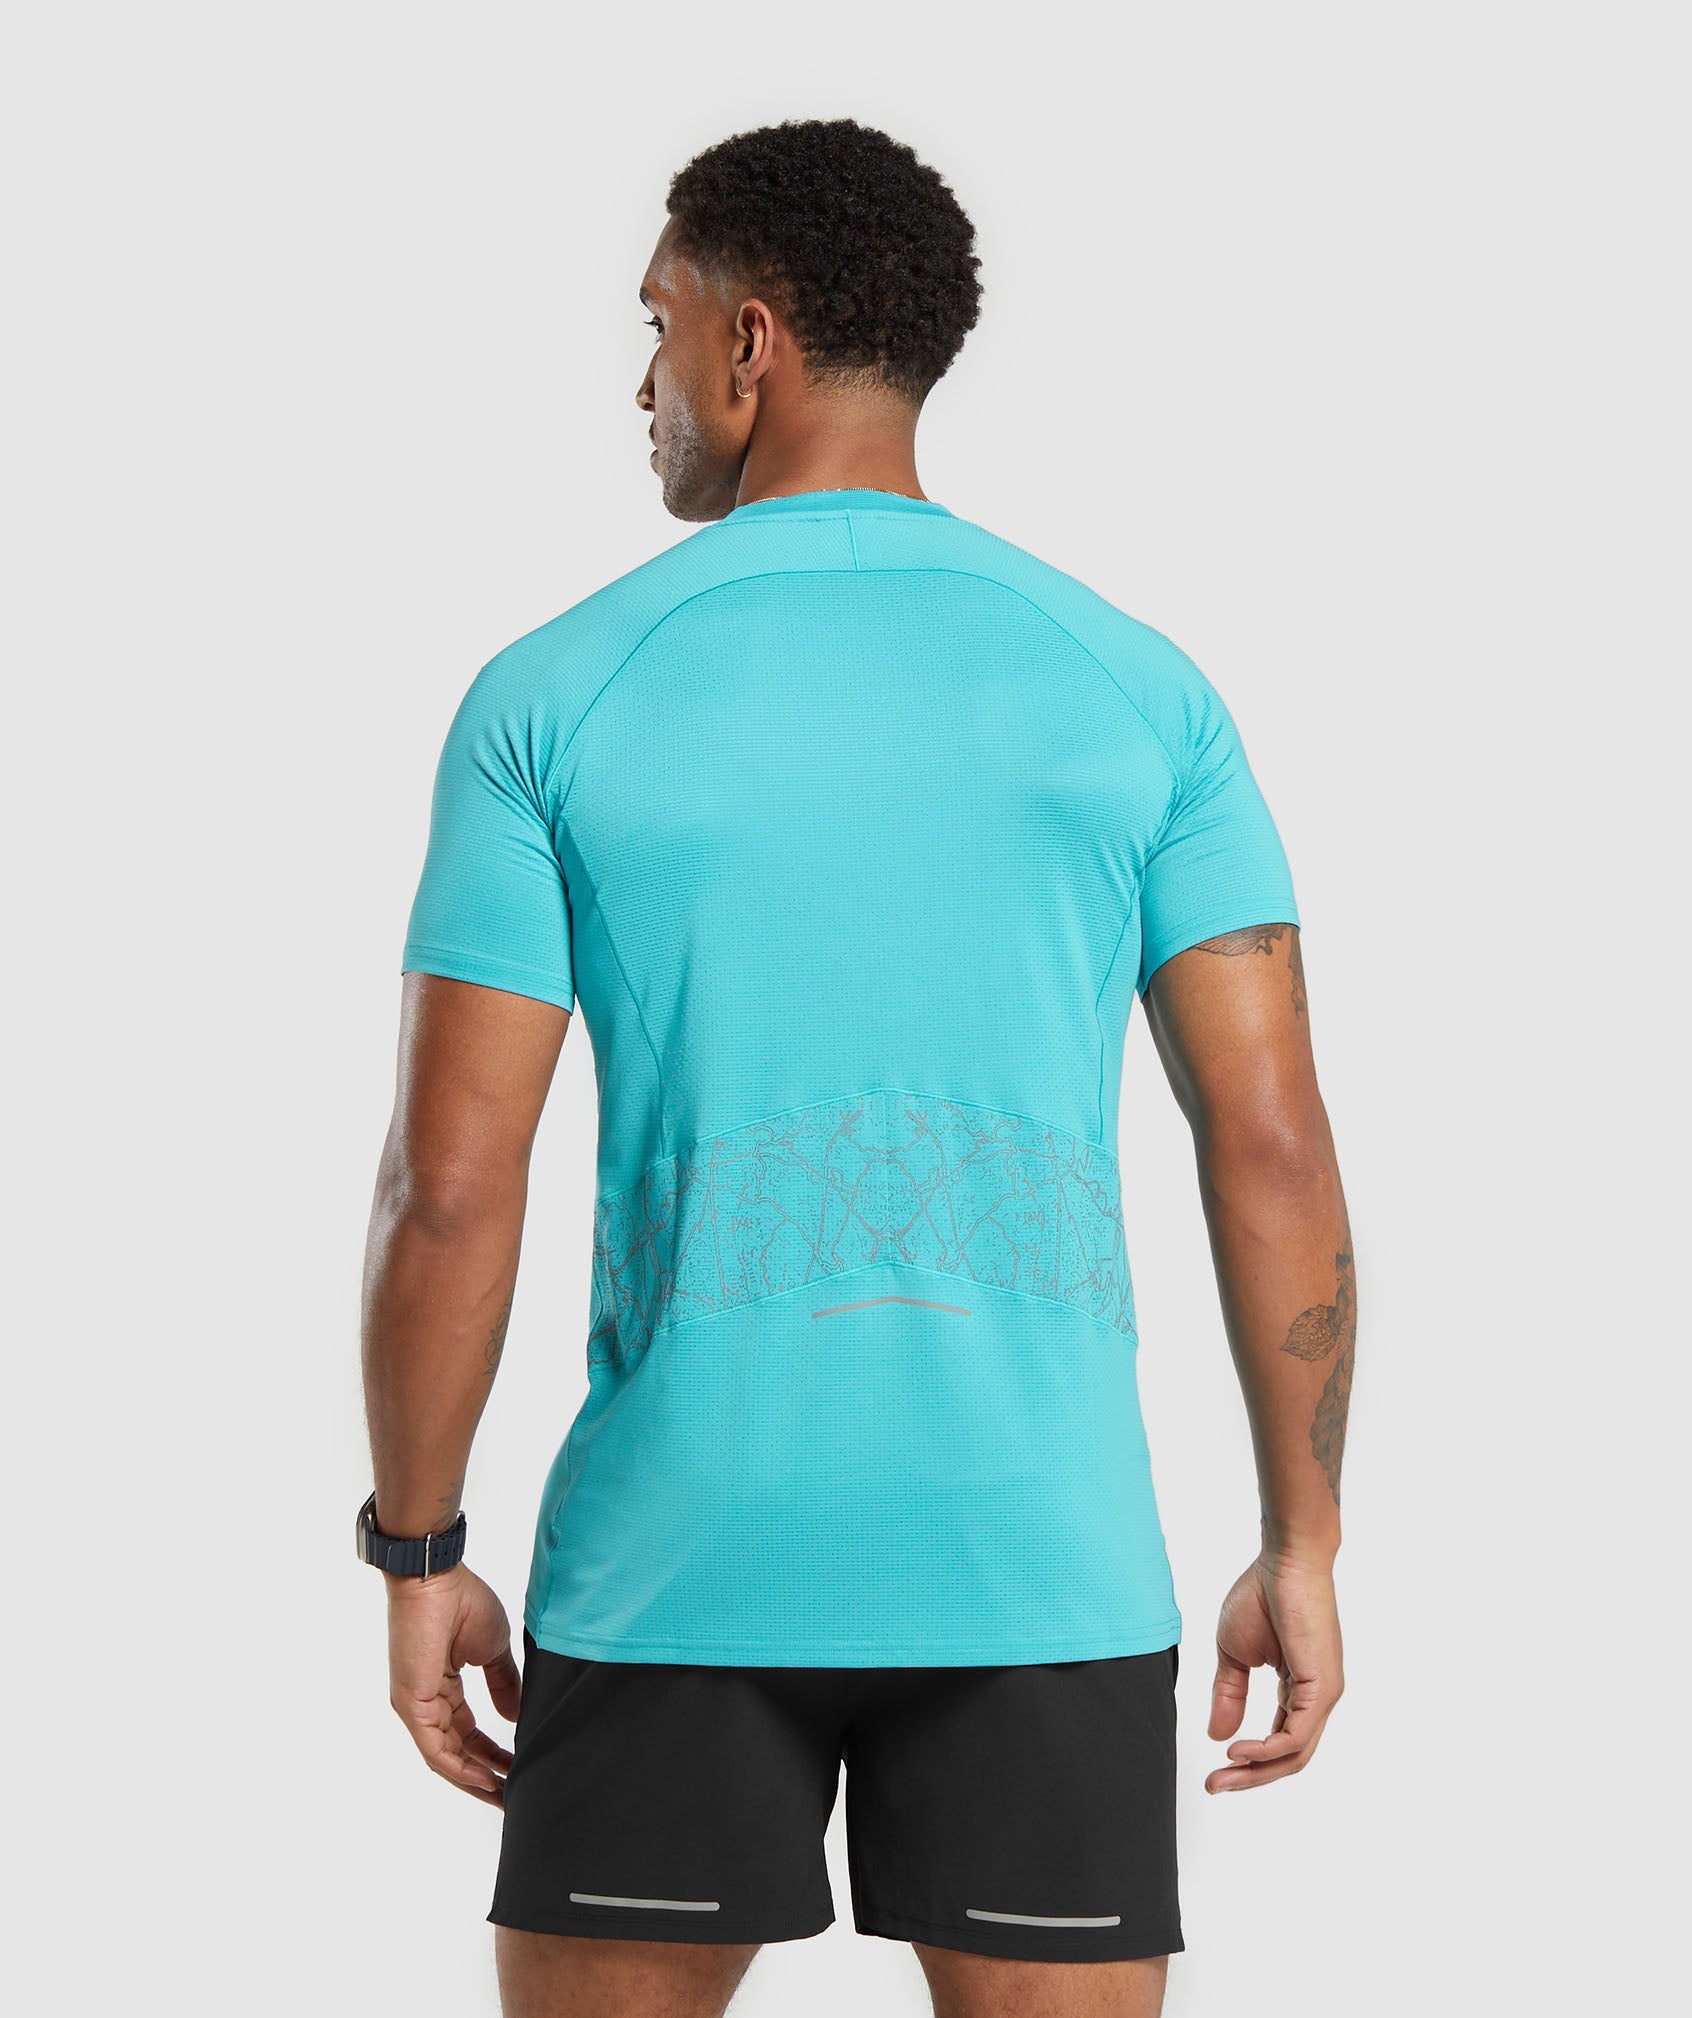 Speed T-Shirt in Artificial Teal - view 3